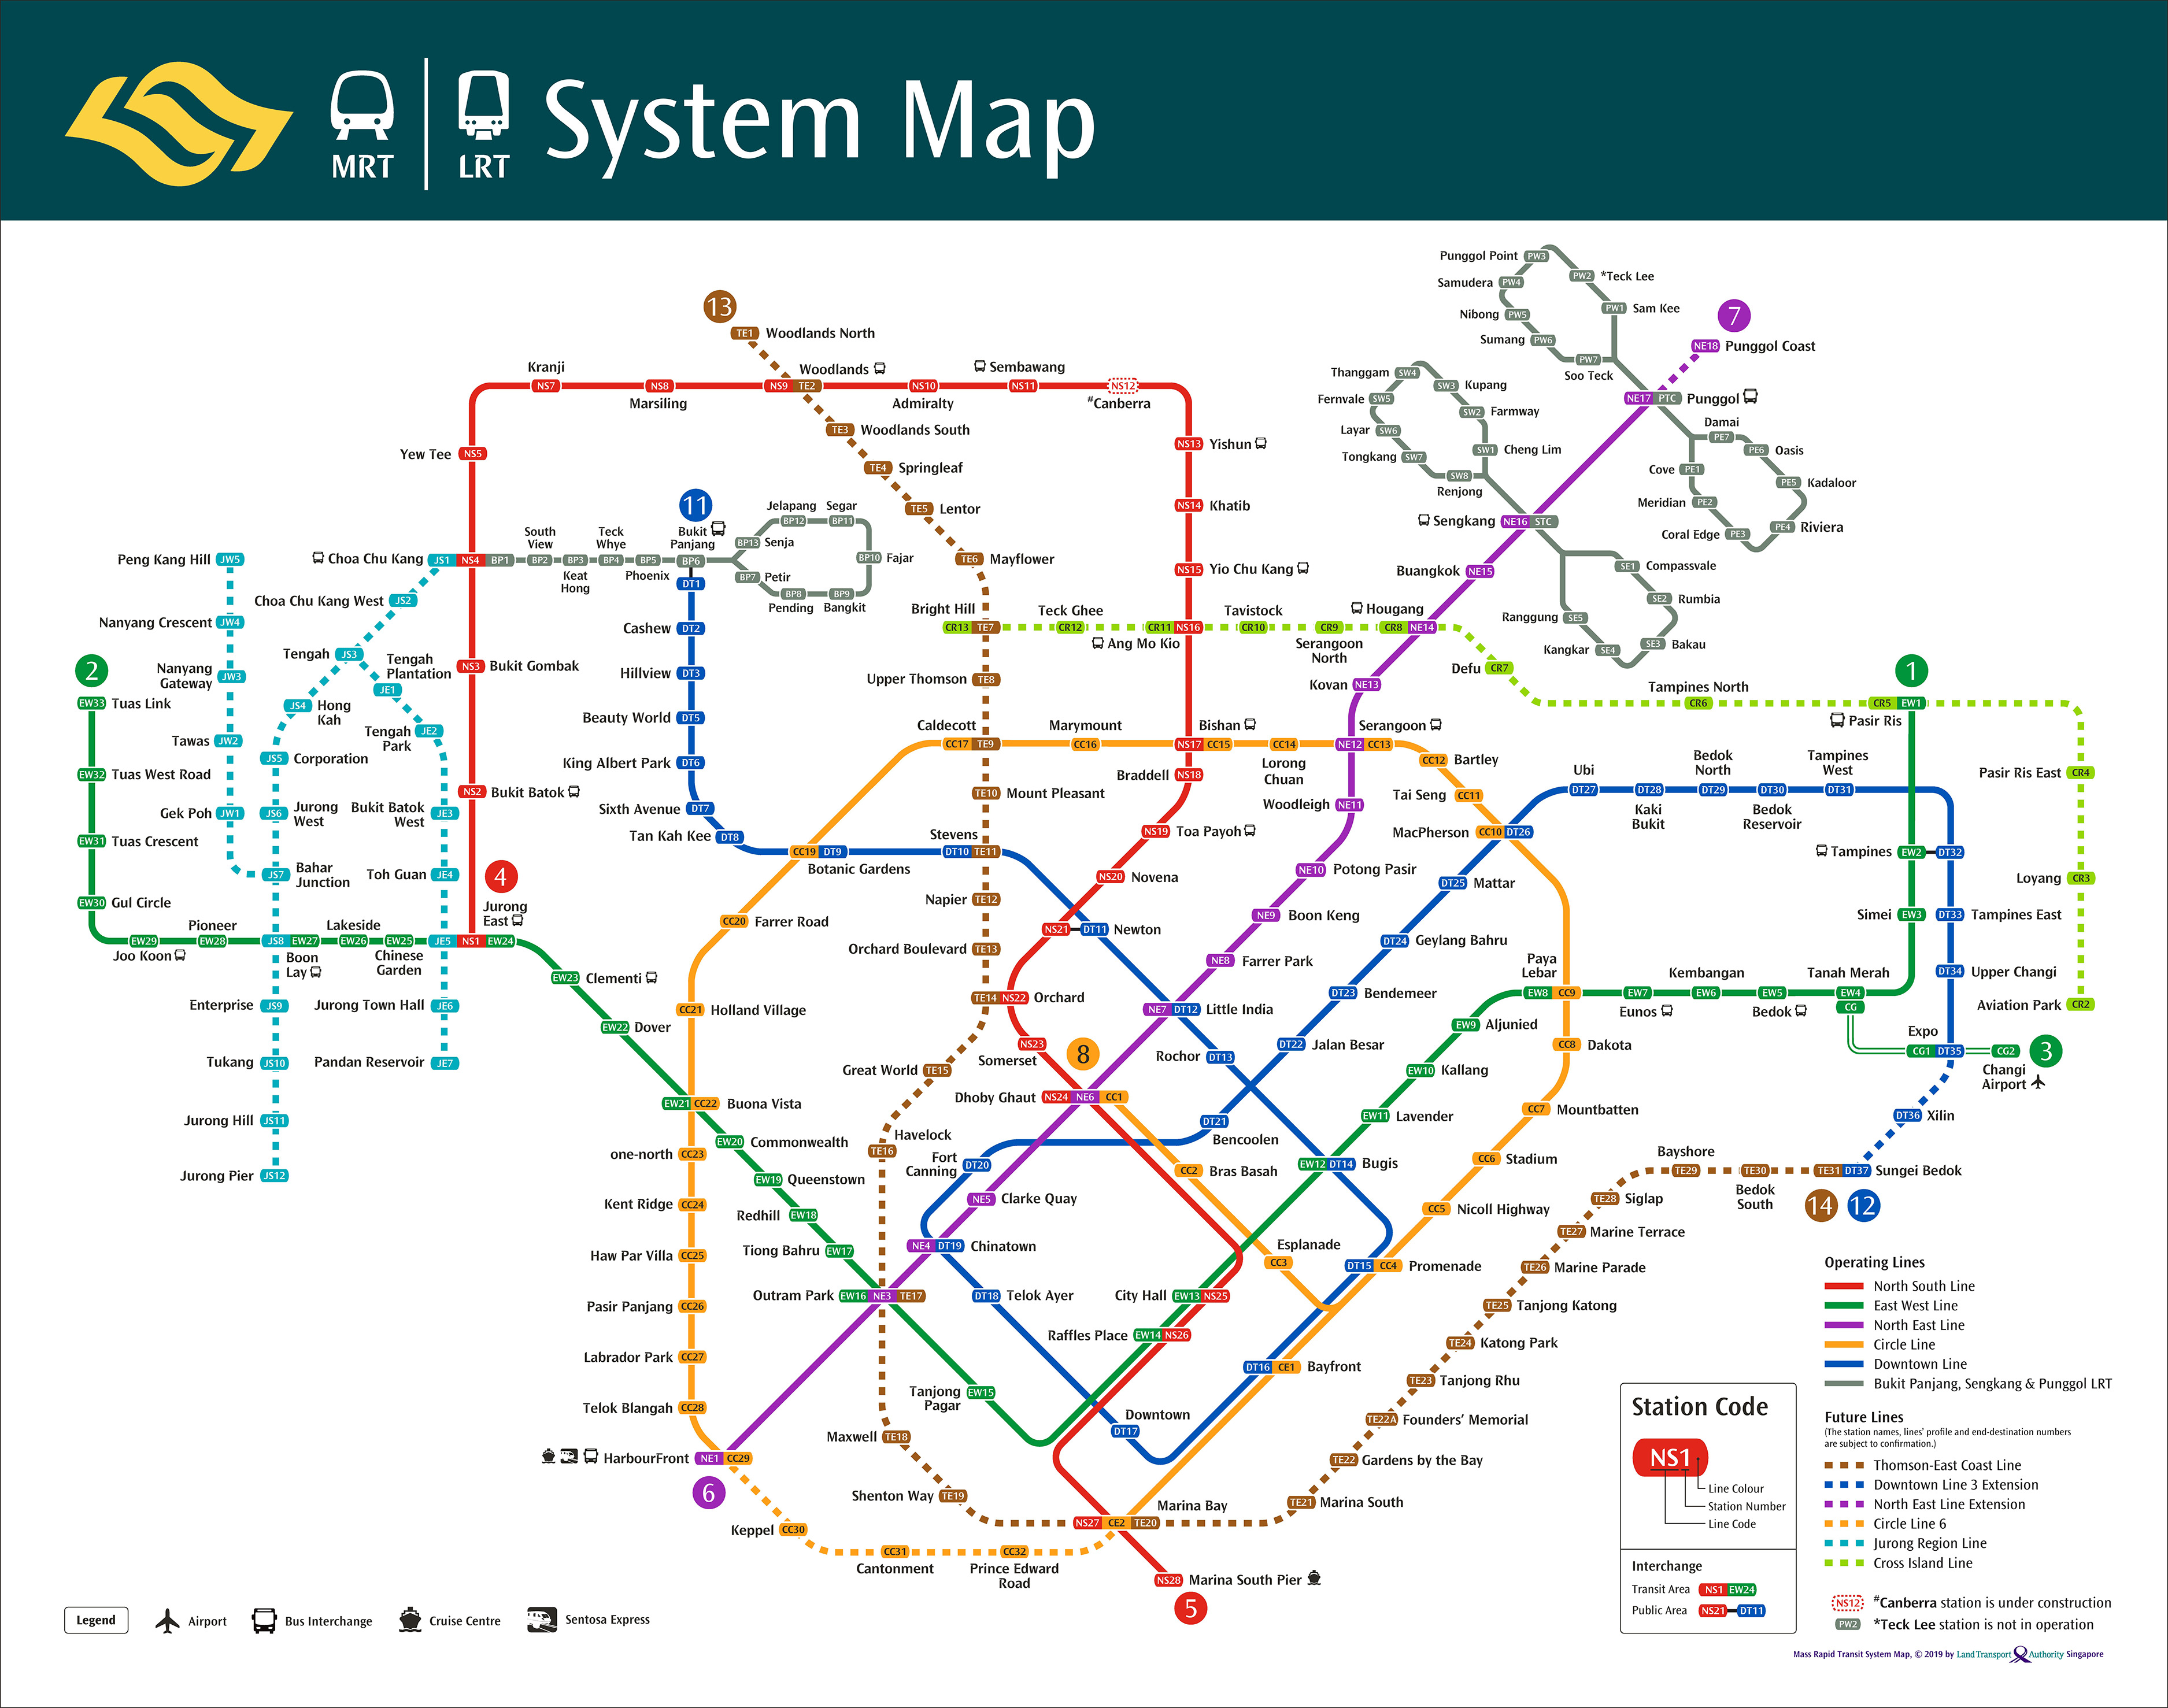 New system map shows MRT lines once entirely in effect by 2030, NTU to